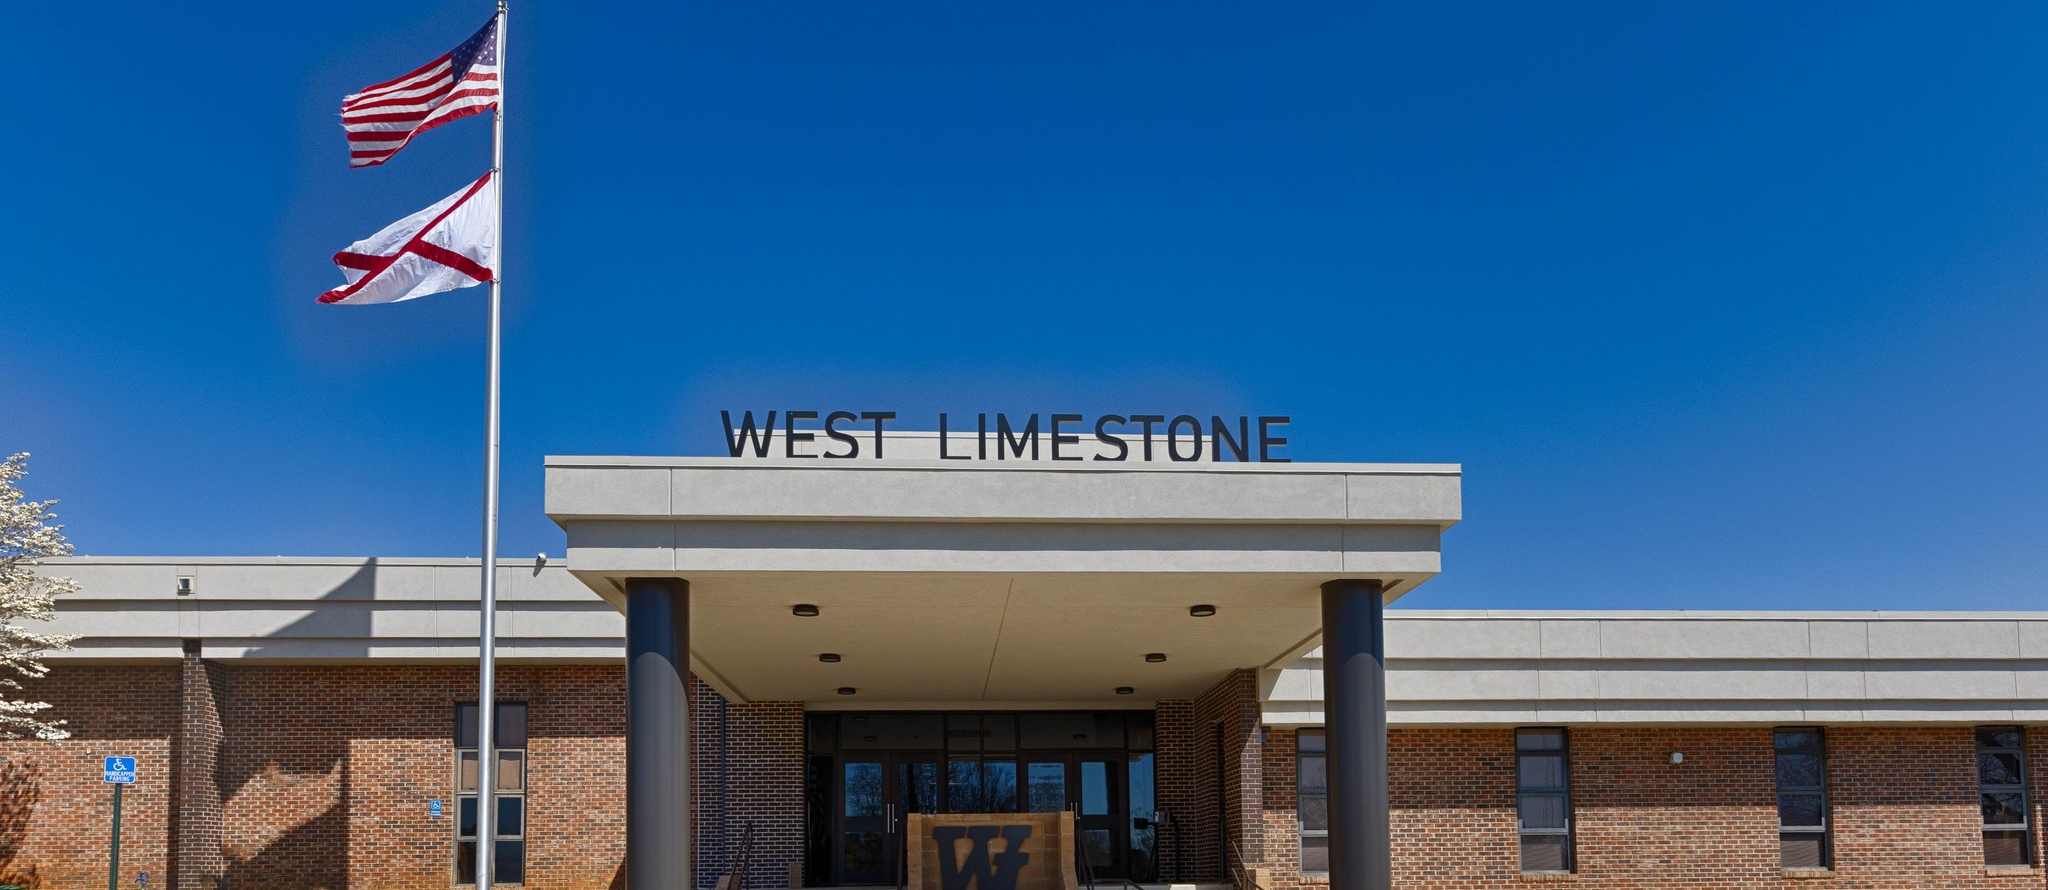 west limestone front of building 